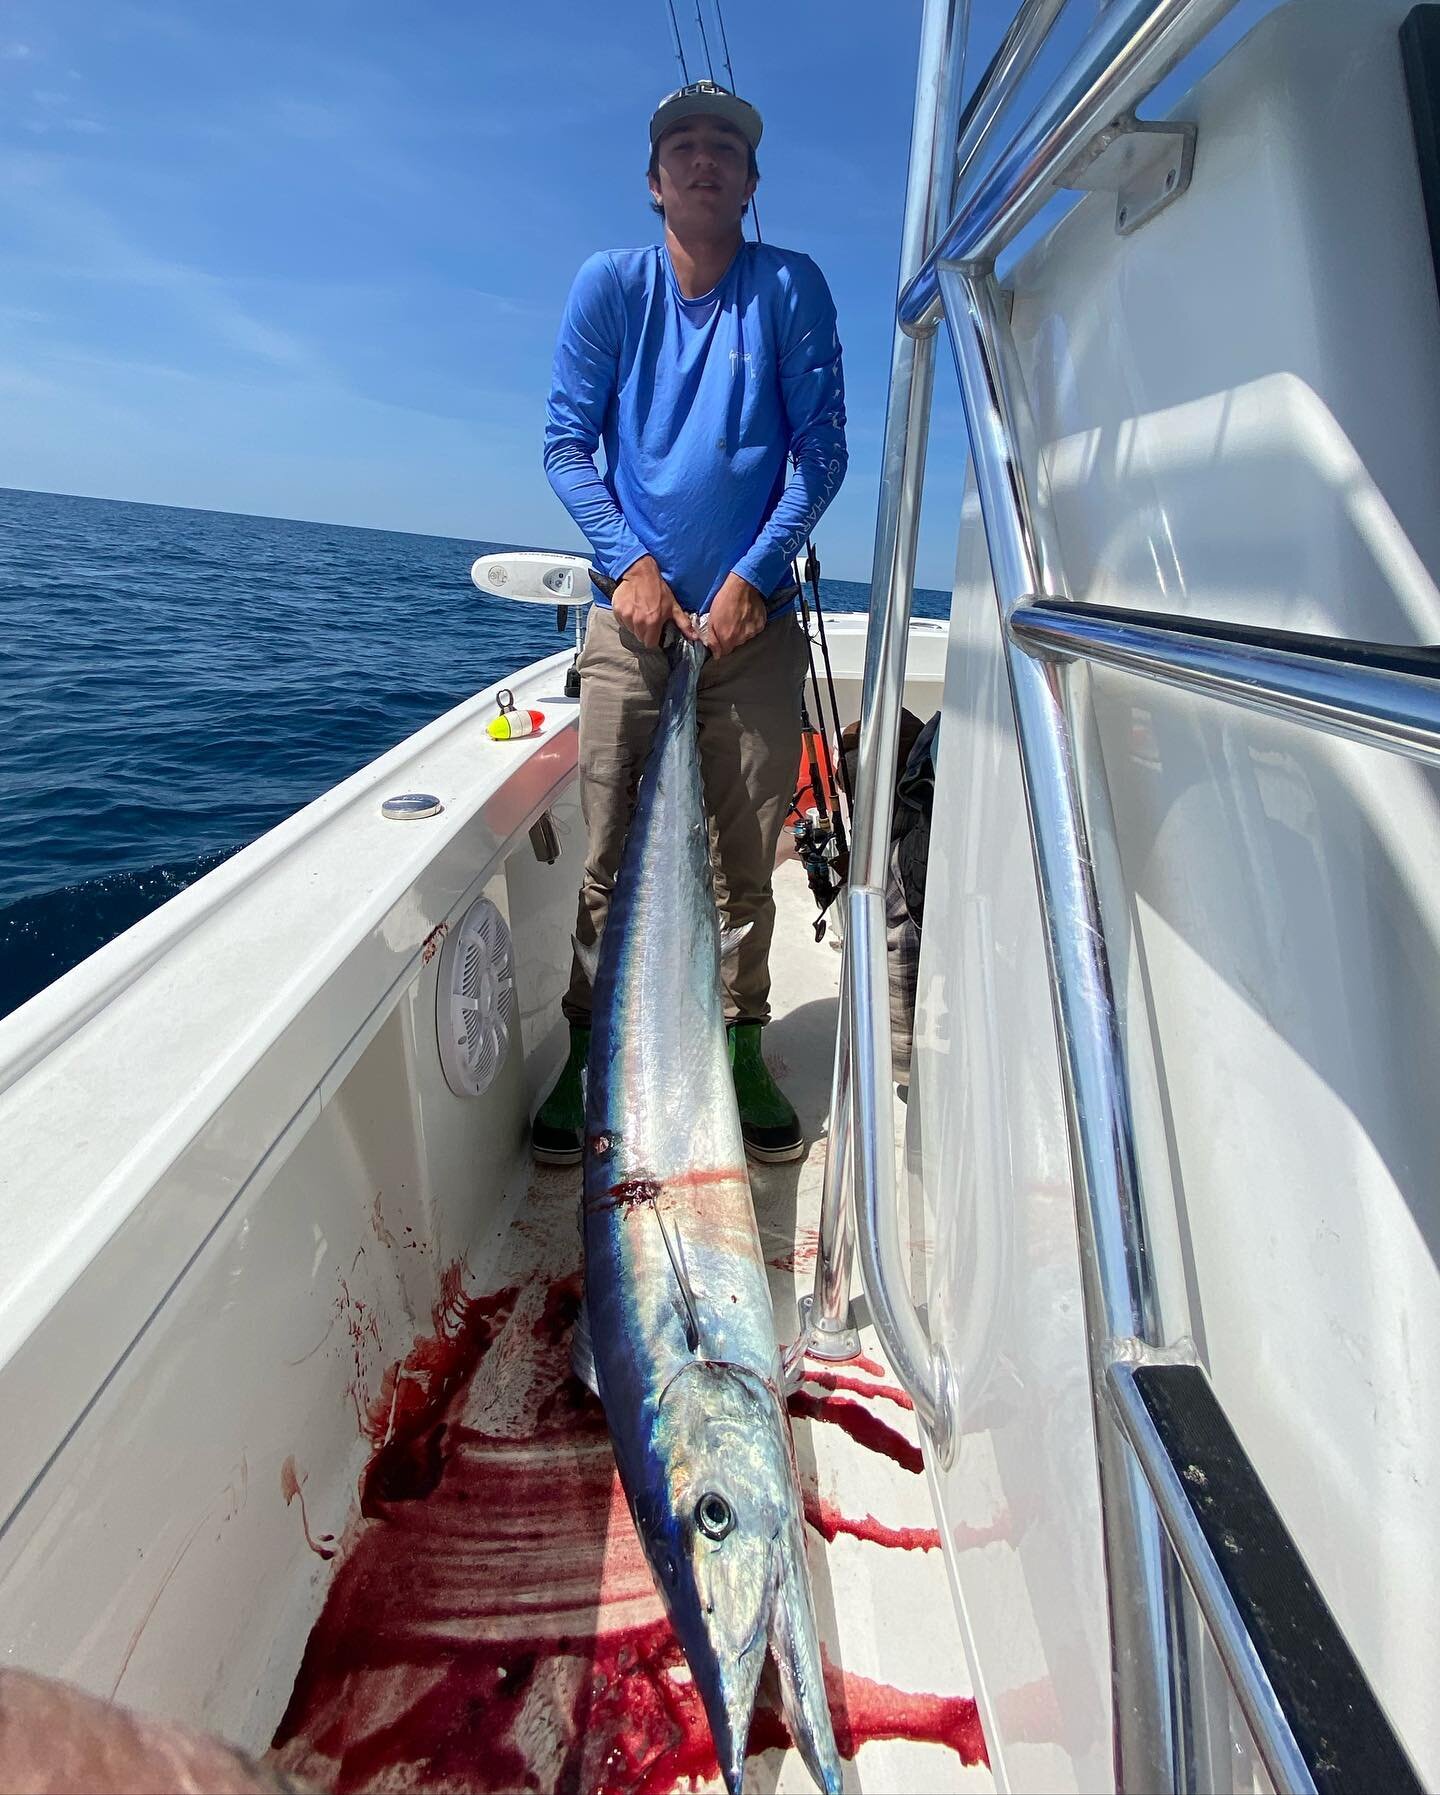 Had the most excellent weather offshore yesterday. Early in the week I decided to take off and try and get to be apart of the latest fashion trend of Live baiting a wahoo. 

What ended up happening was the most wild fish story I&rsquo;ll tell for the